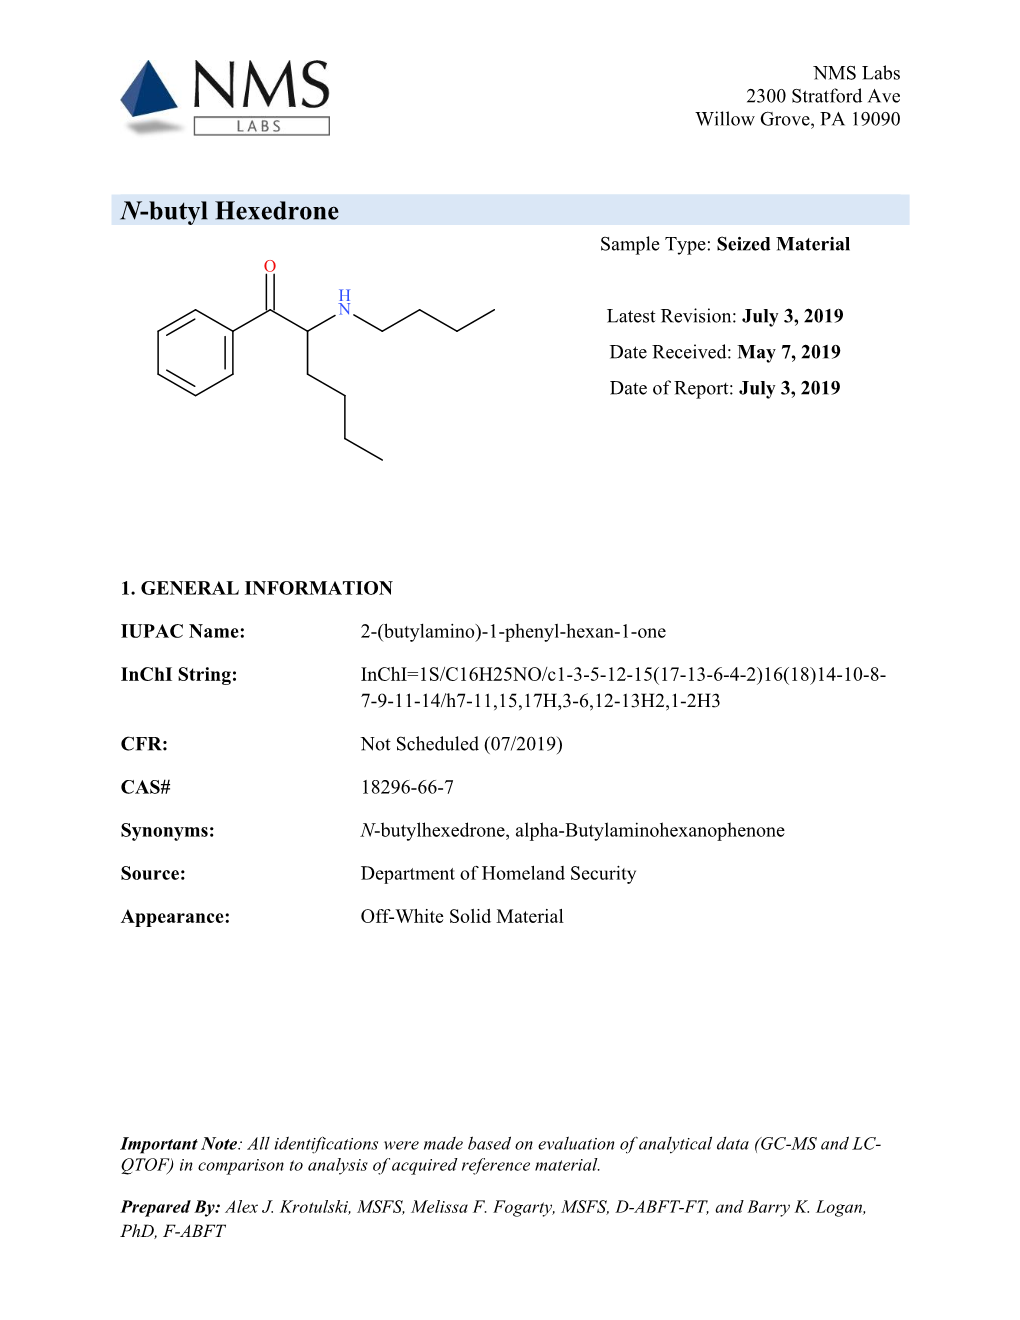 N-Butyl Hexedrone Sample Type: Seized Material